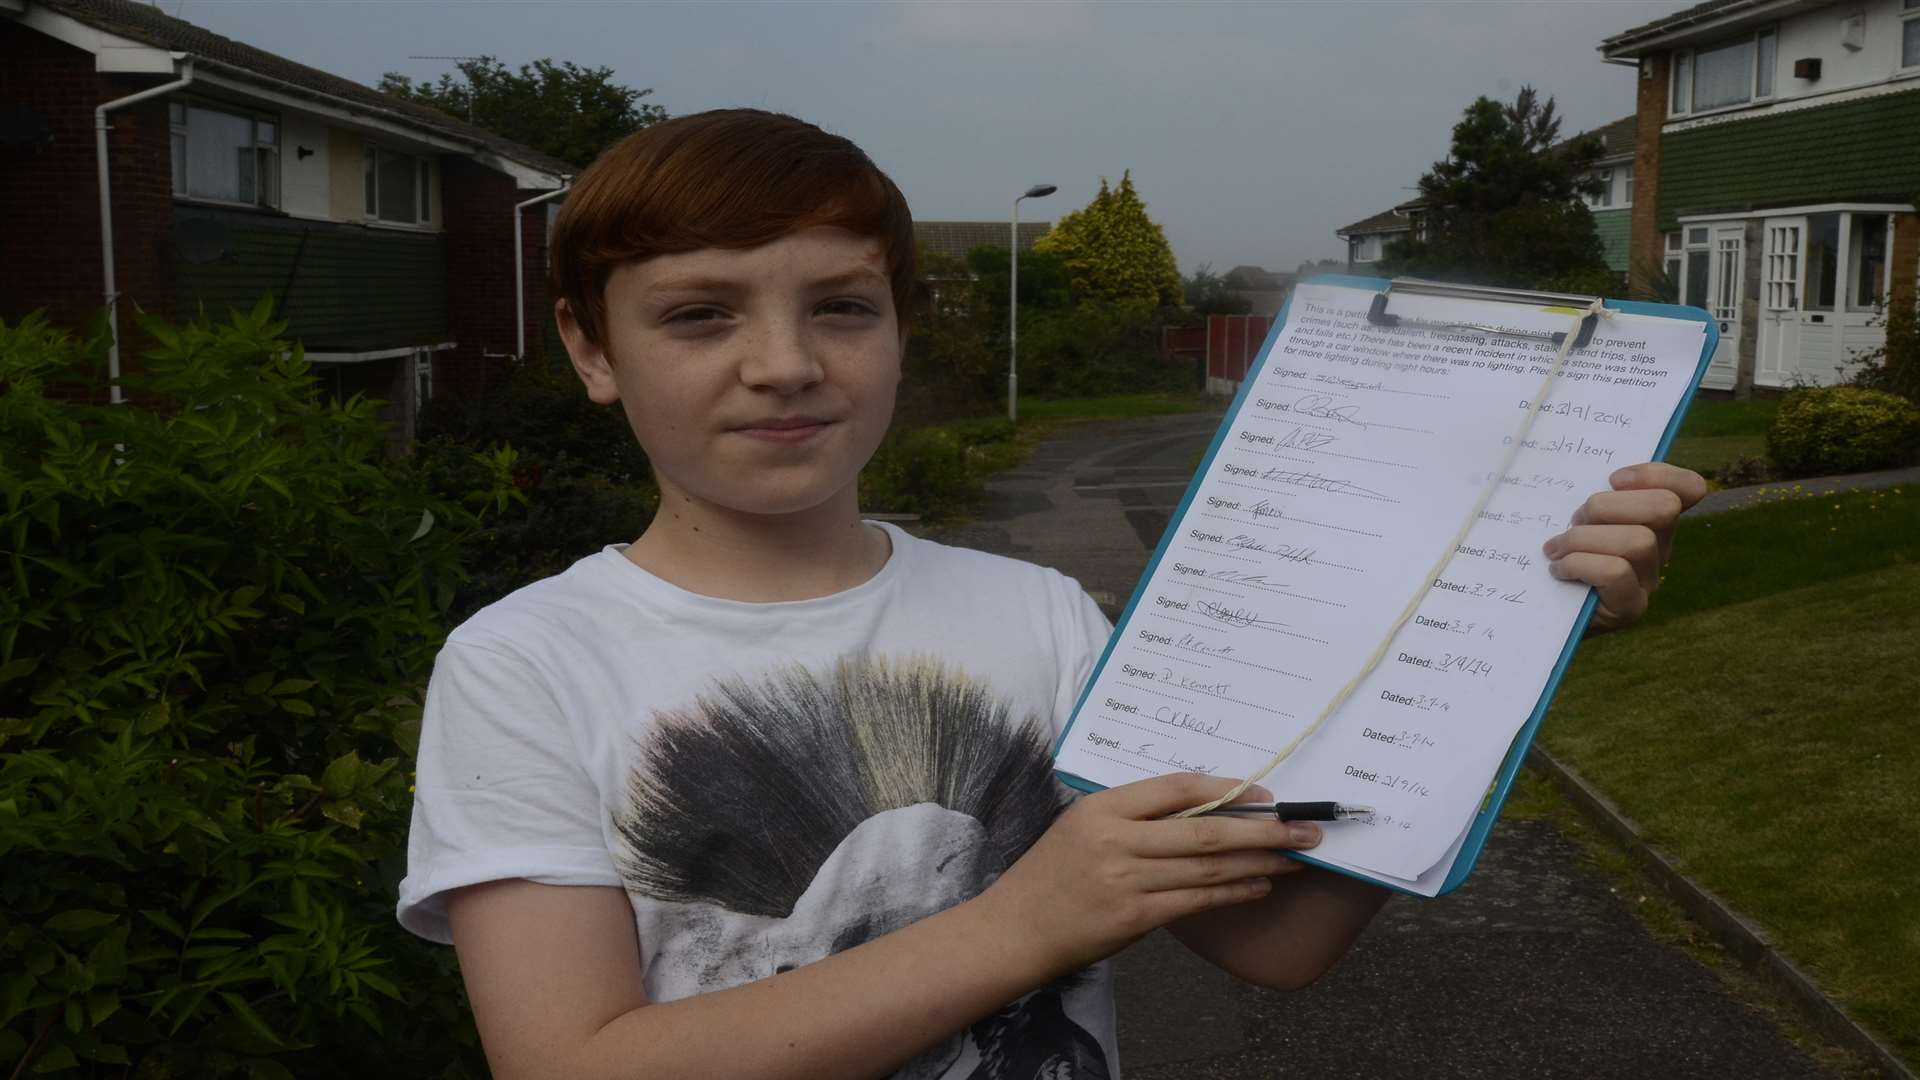 Rian Leggett, 13, is one of a number of Kent residents who want the lights switched back on